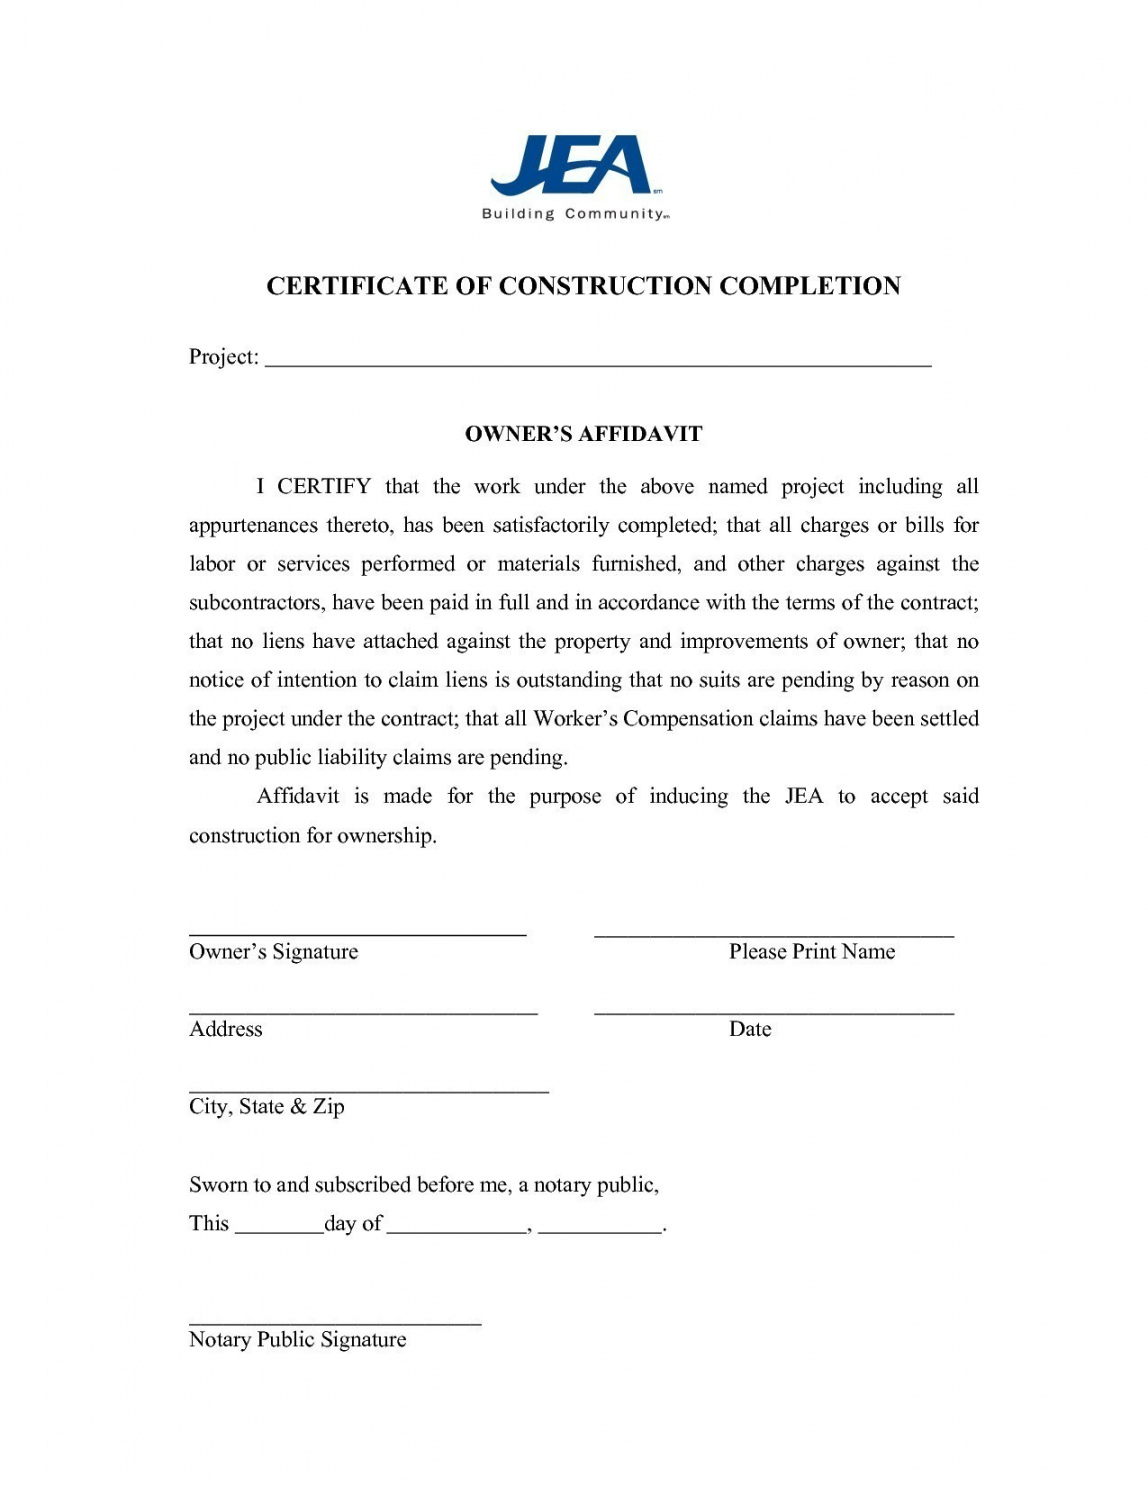 Construction Completion Certificate Template | Emetonlineblog Intended For Certificate Template For Project Completion